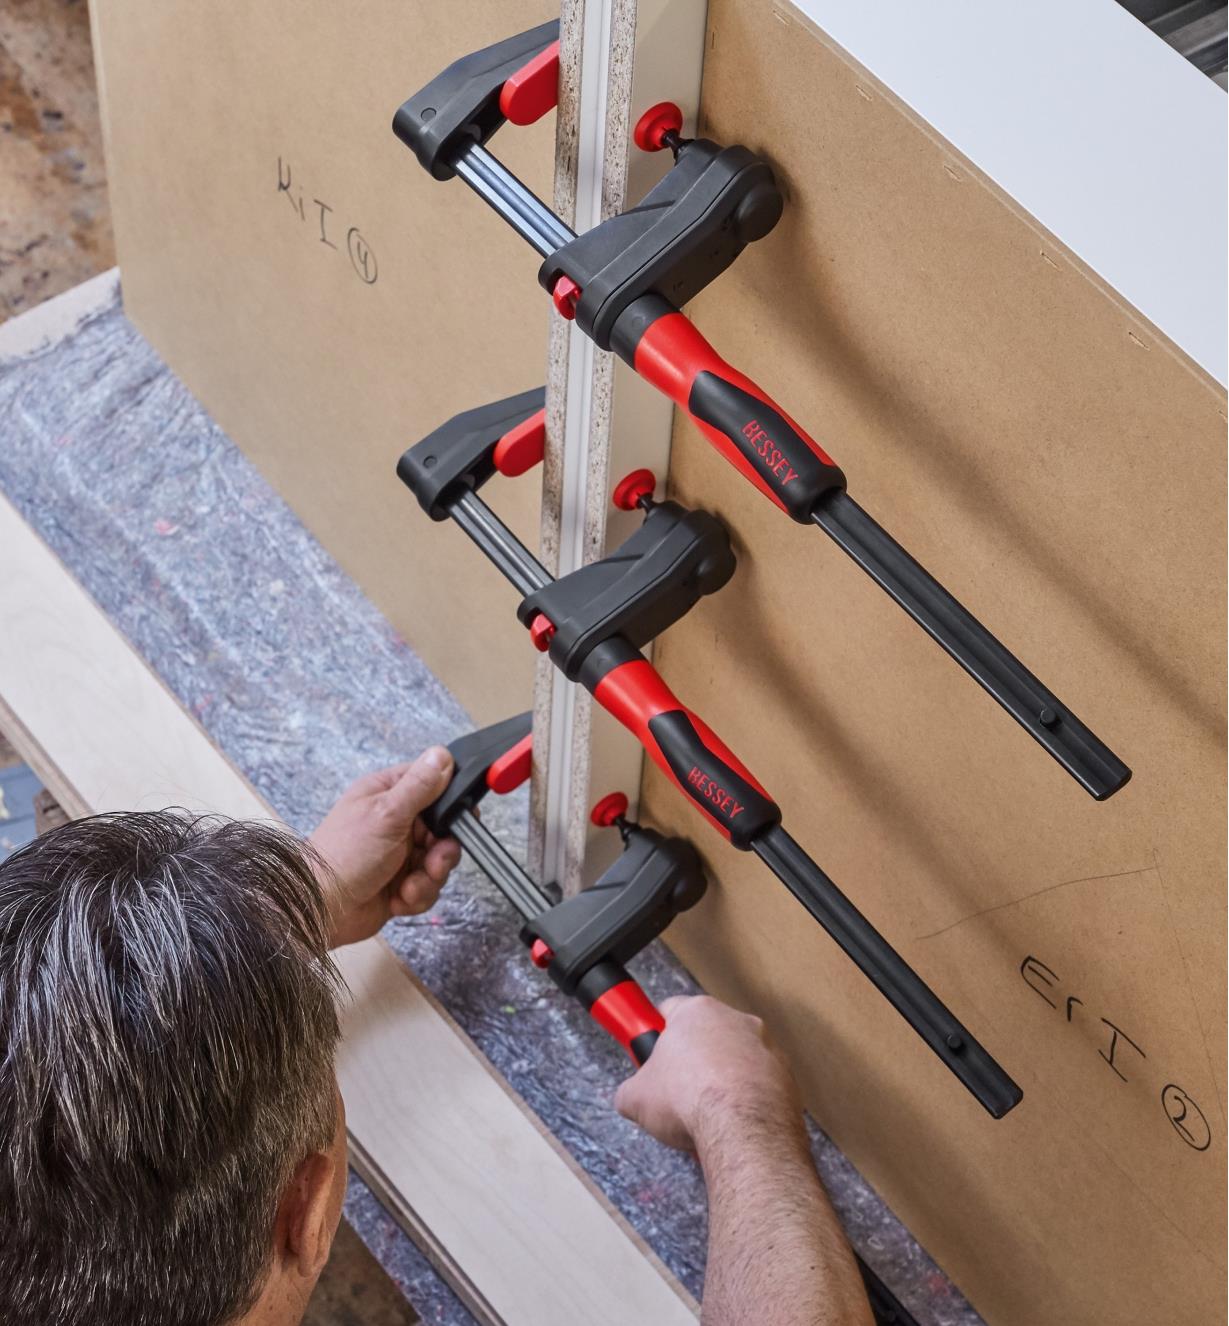 Put the “Pro” in Proficiency with BESSEY’s GearKlamp® Bar Clamps